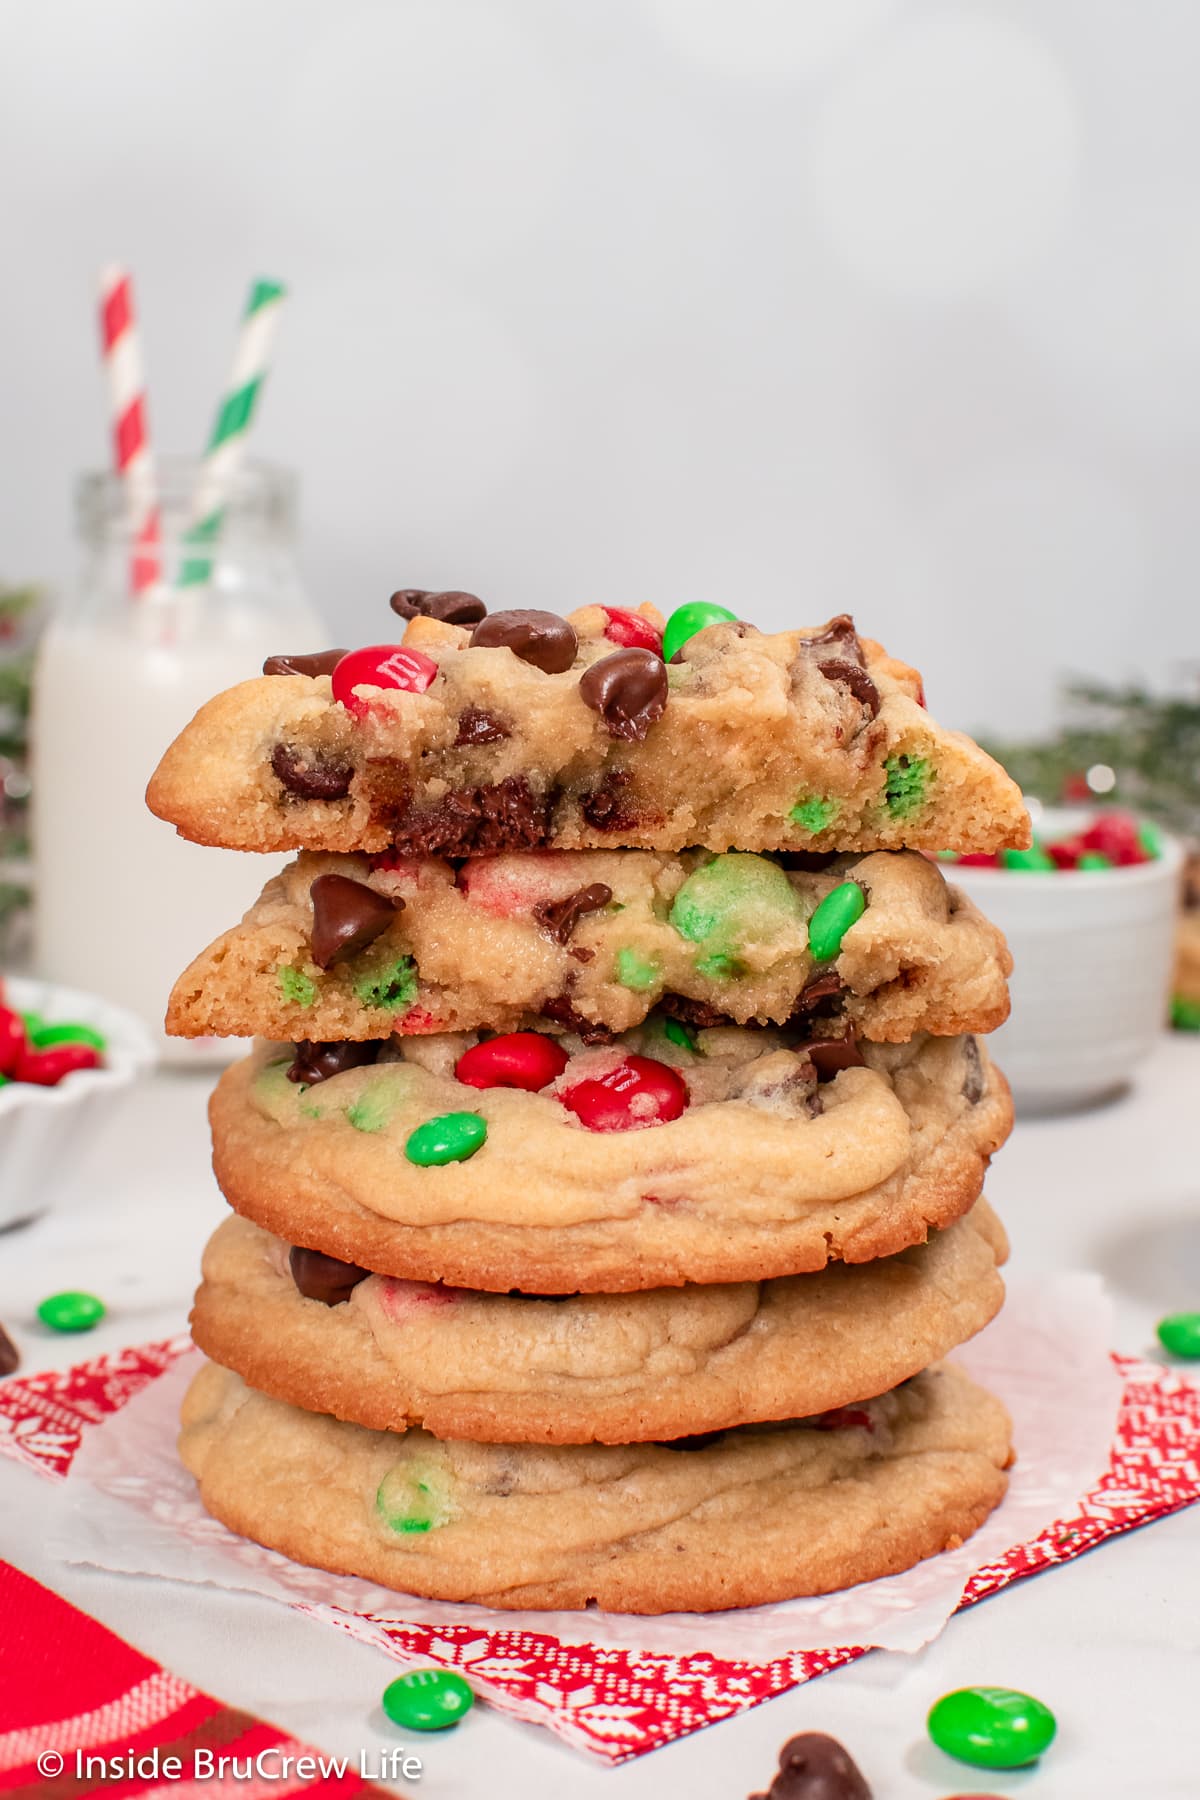 A stack of cookies with one broken in half on the top.